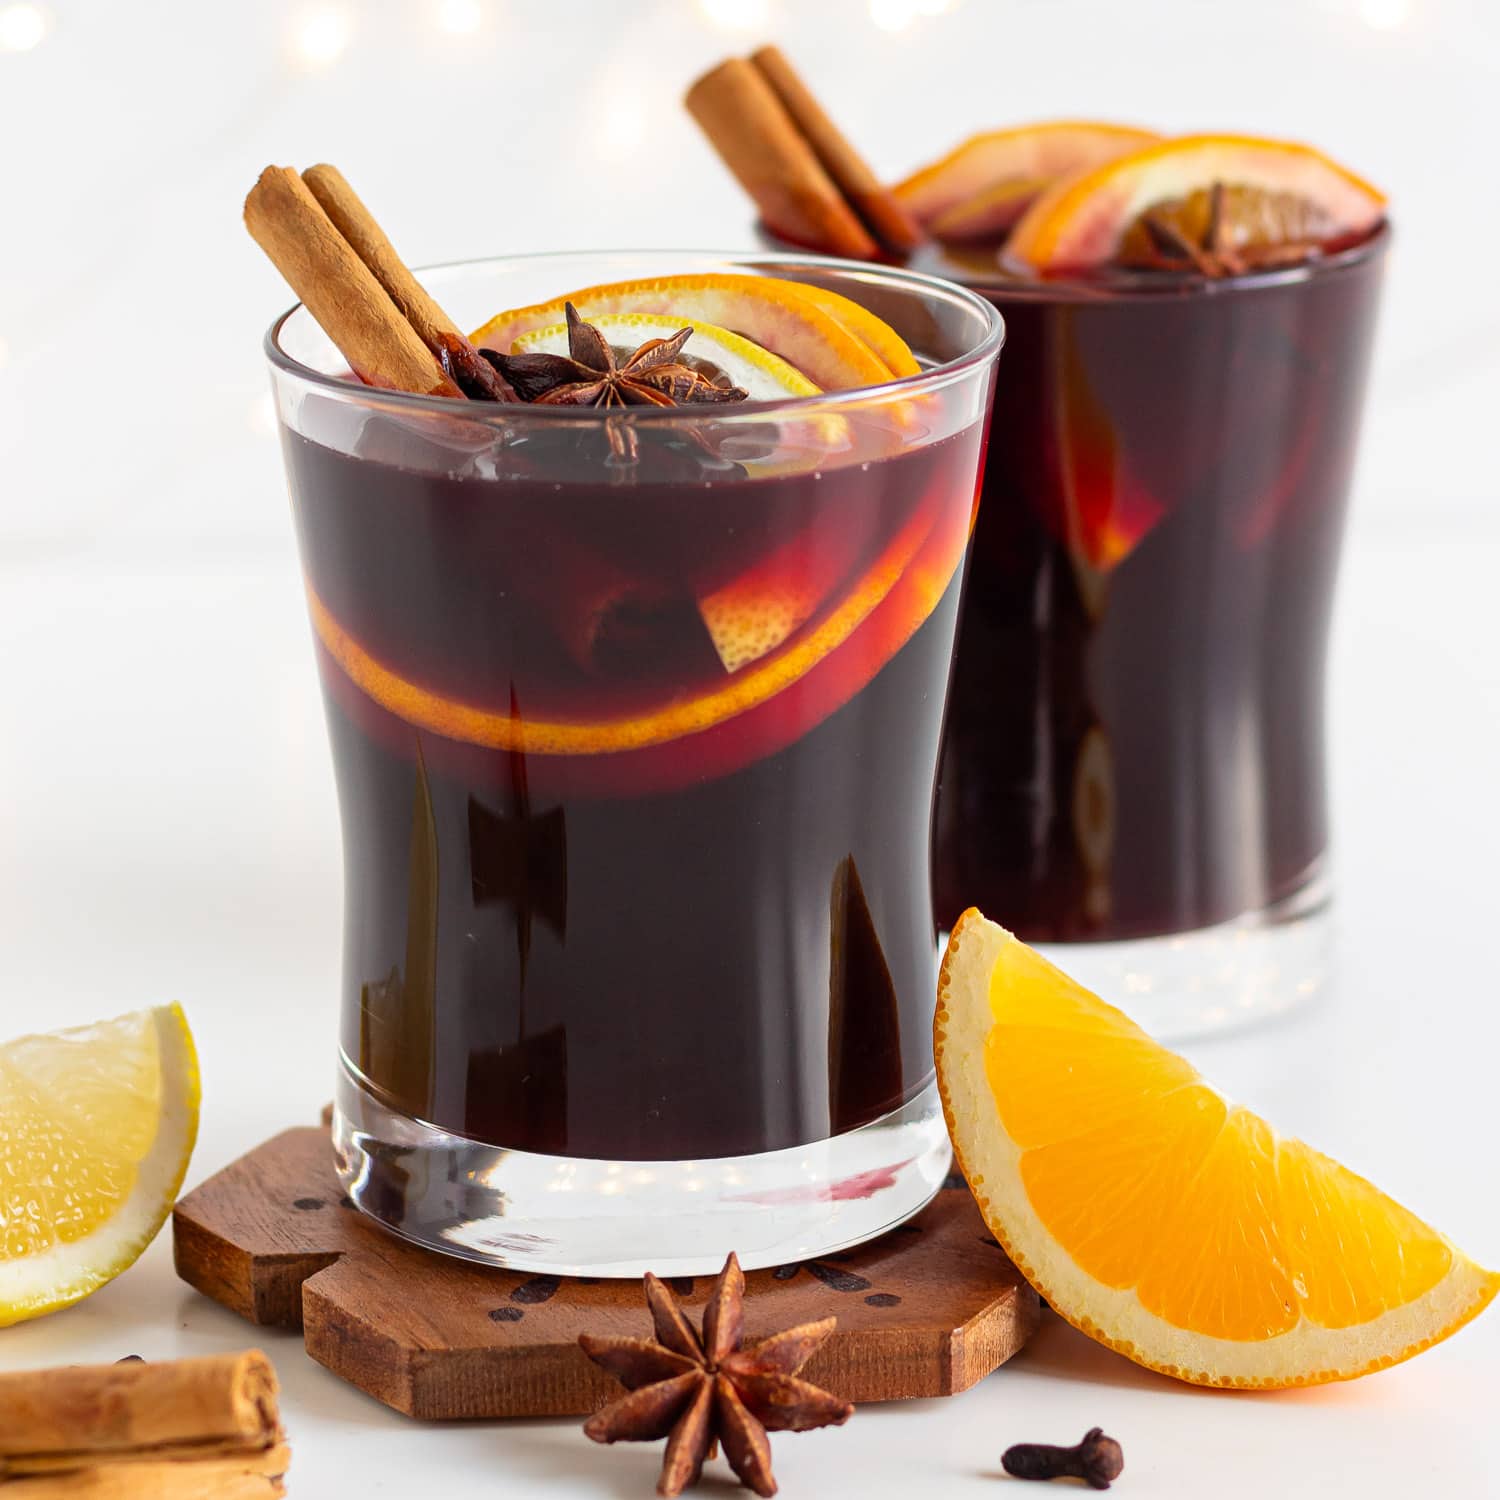 Two glasses of Gluhwein garnished with orange, cinnamon sticks and star anise.